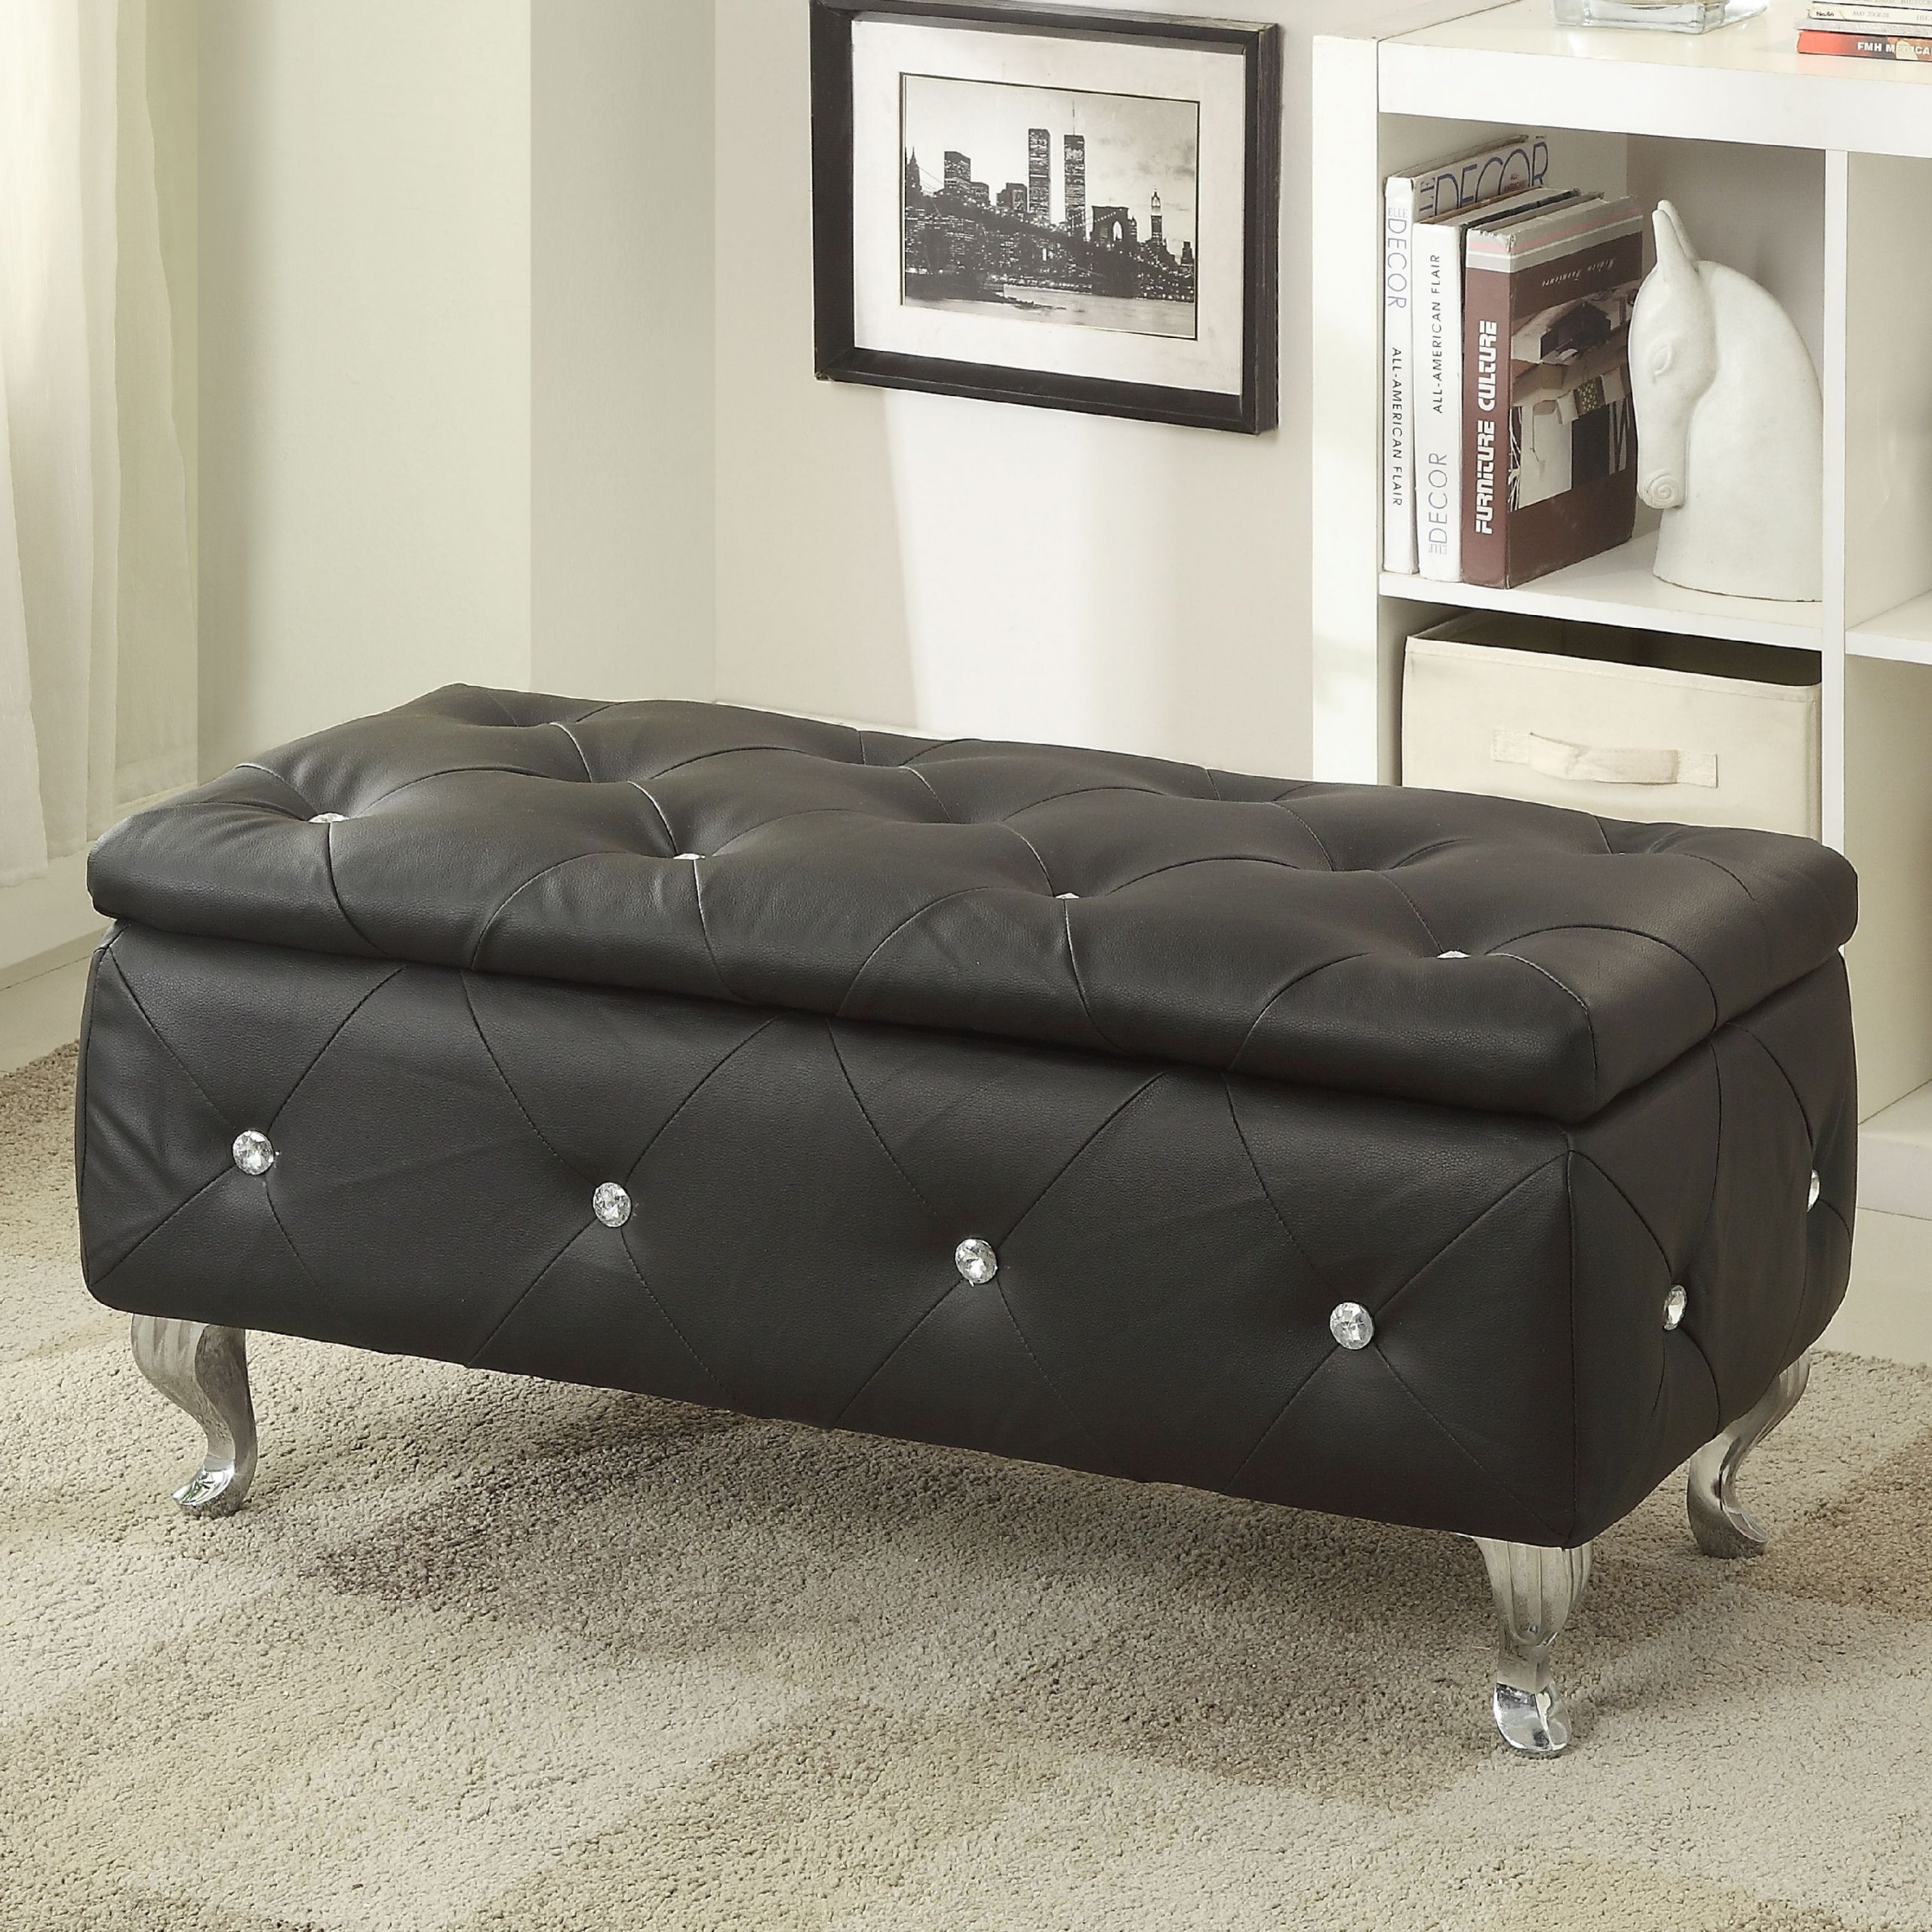 Black Bench With Storage
 Long Bench With Storage – HomesFeed